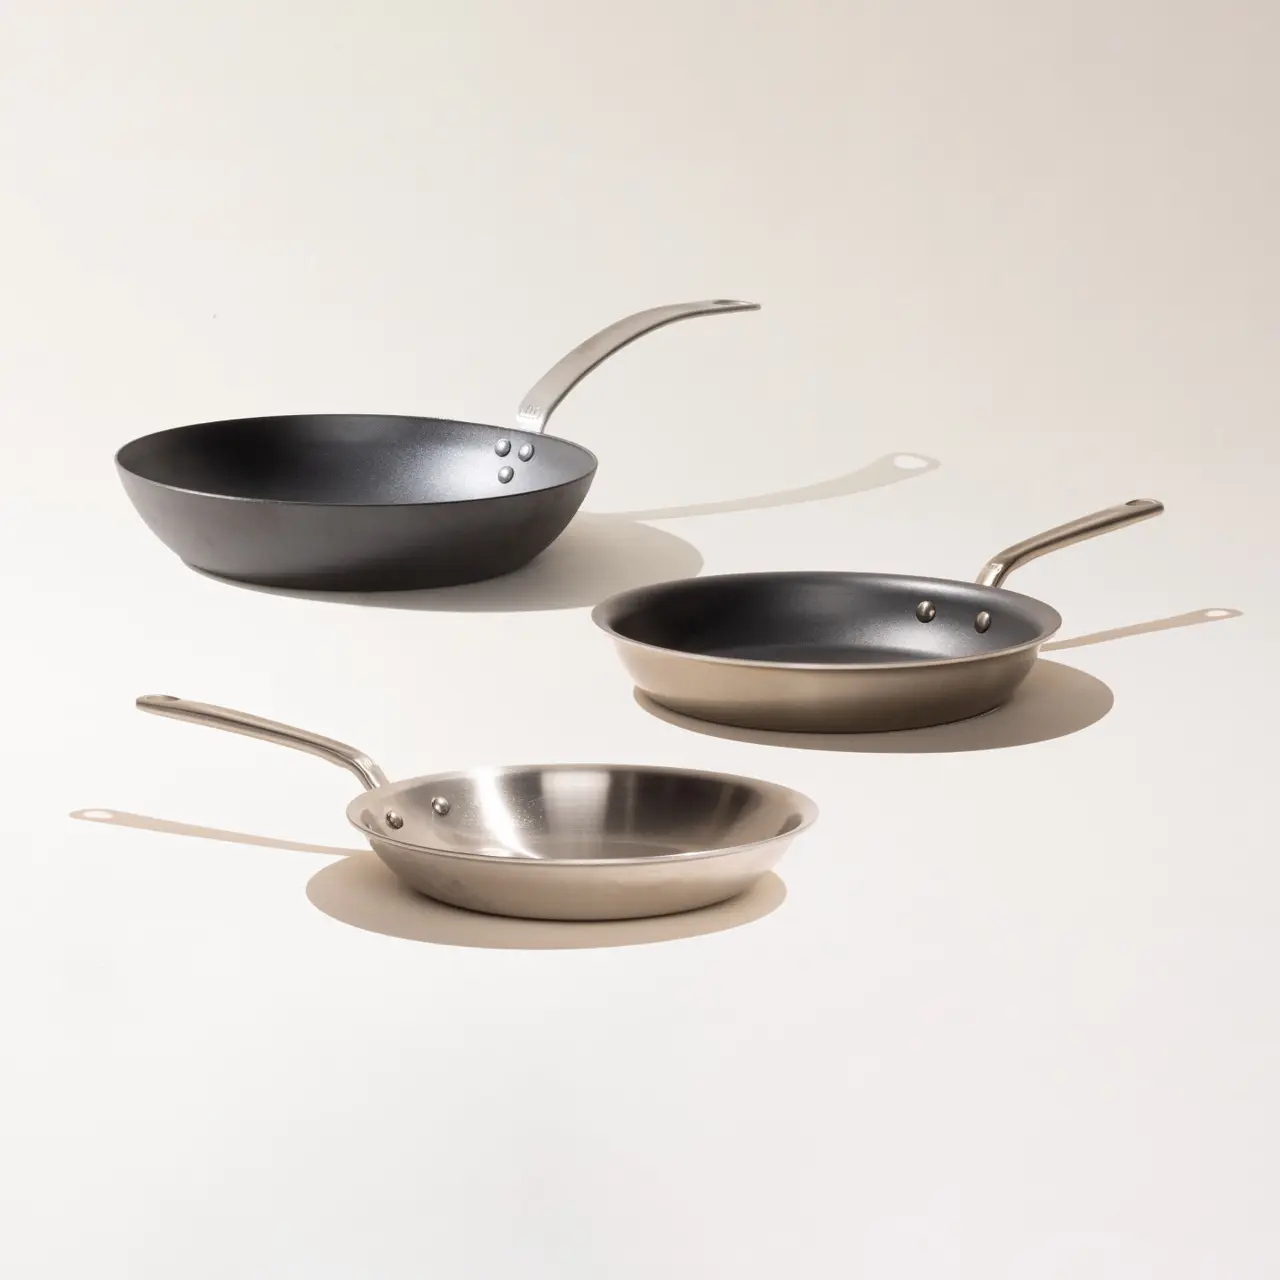 Three different-sized frying pans with varying finishes are neatly arranged in a descending row from left to right against a light background.